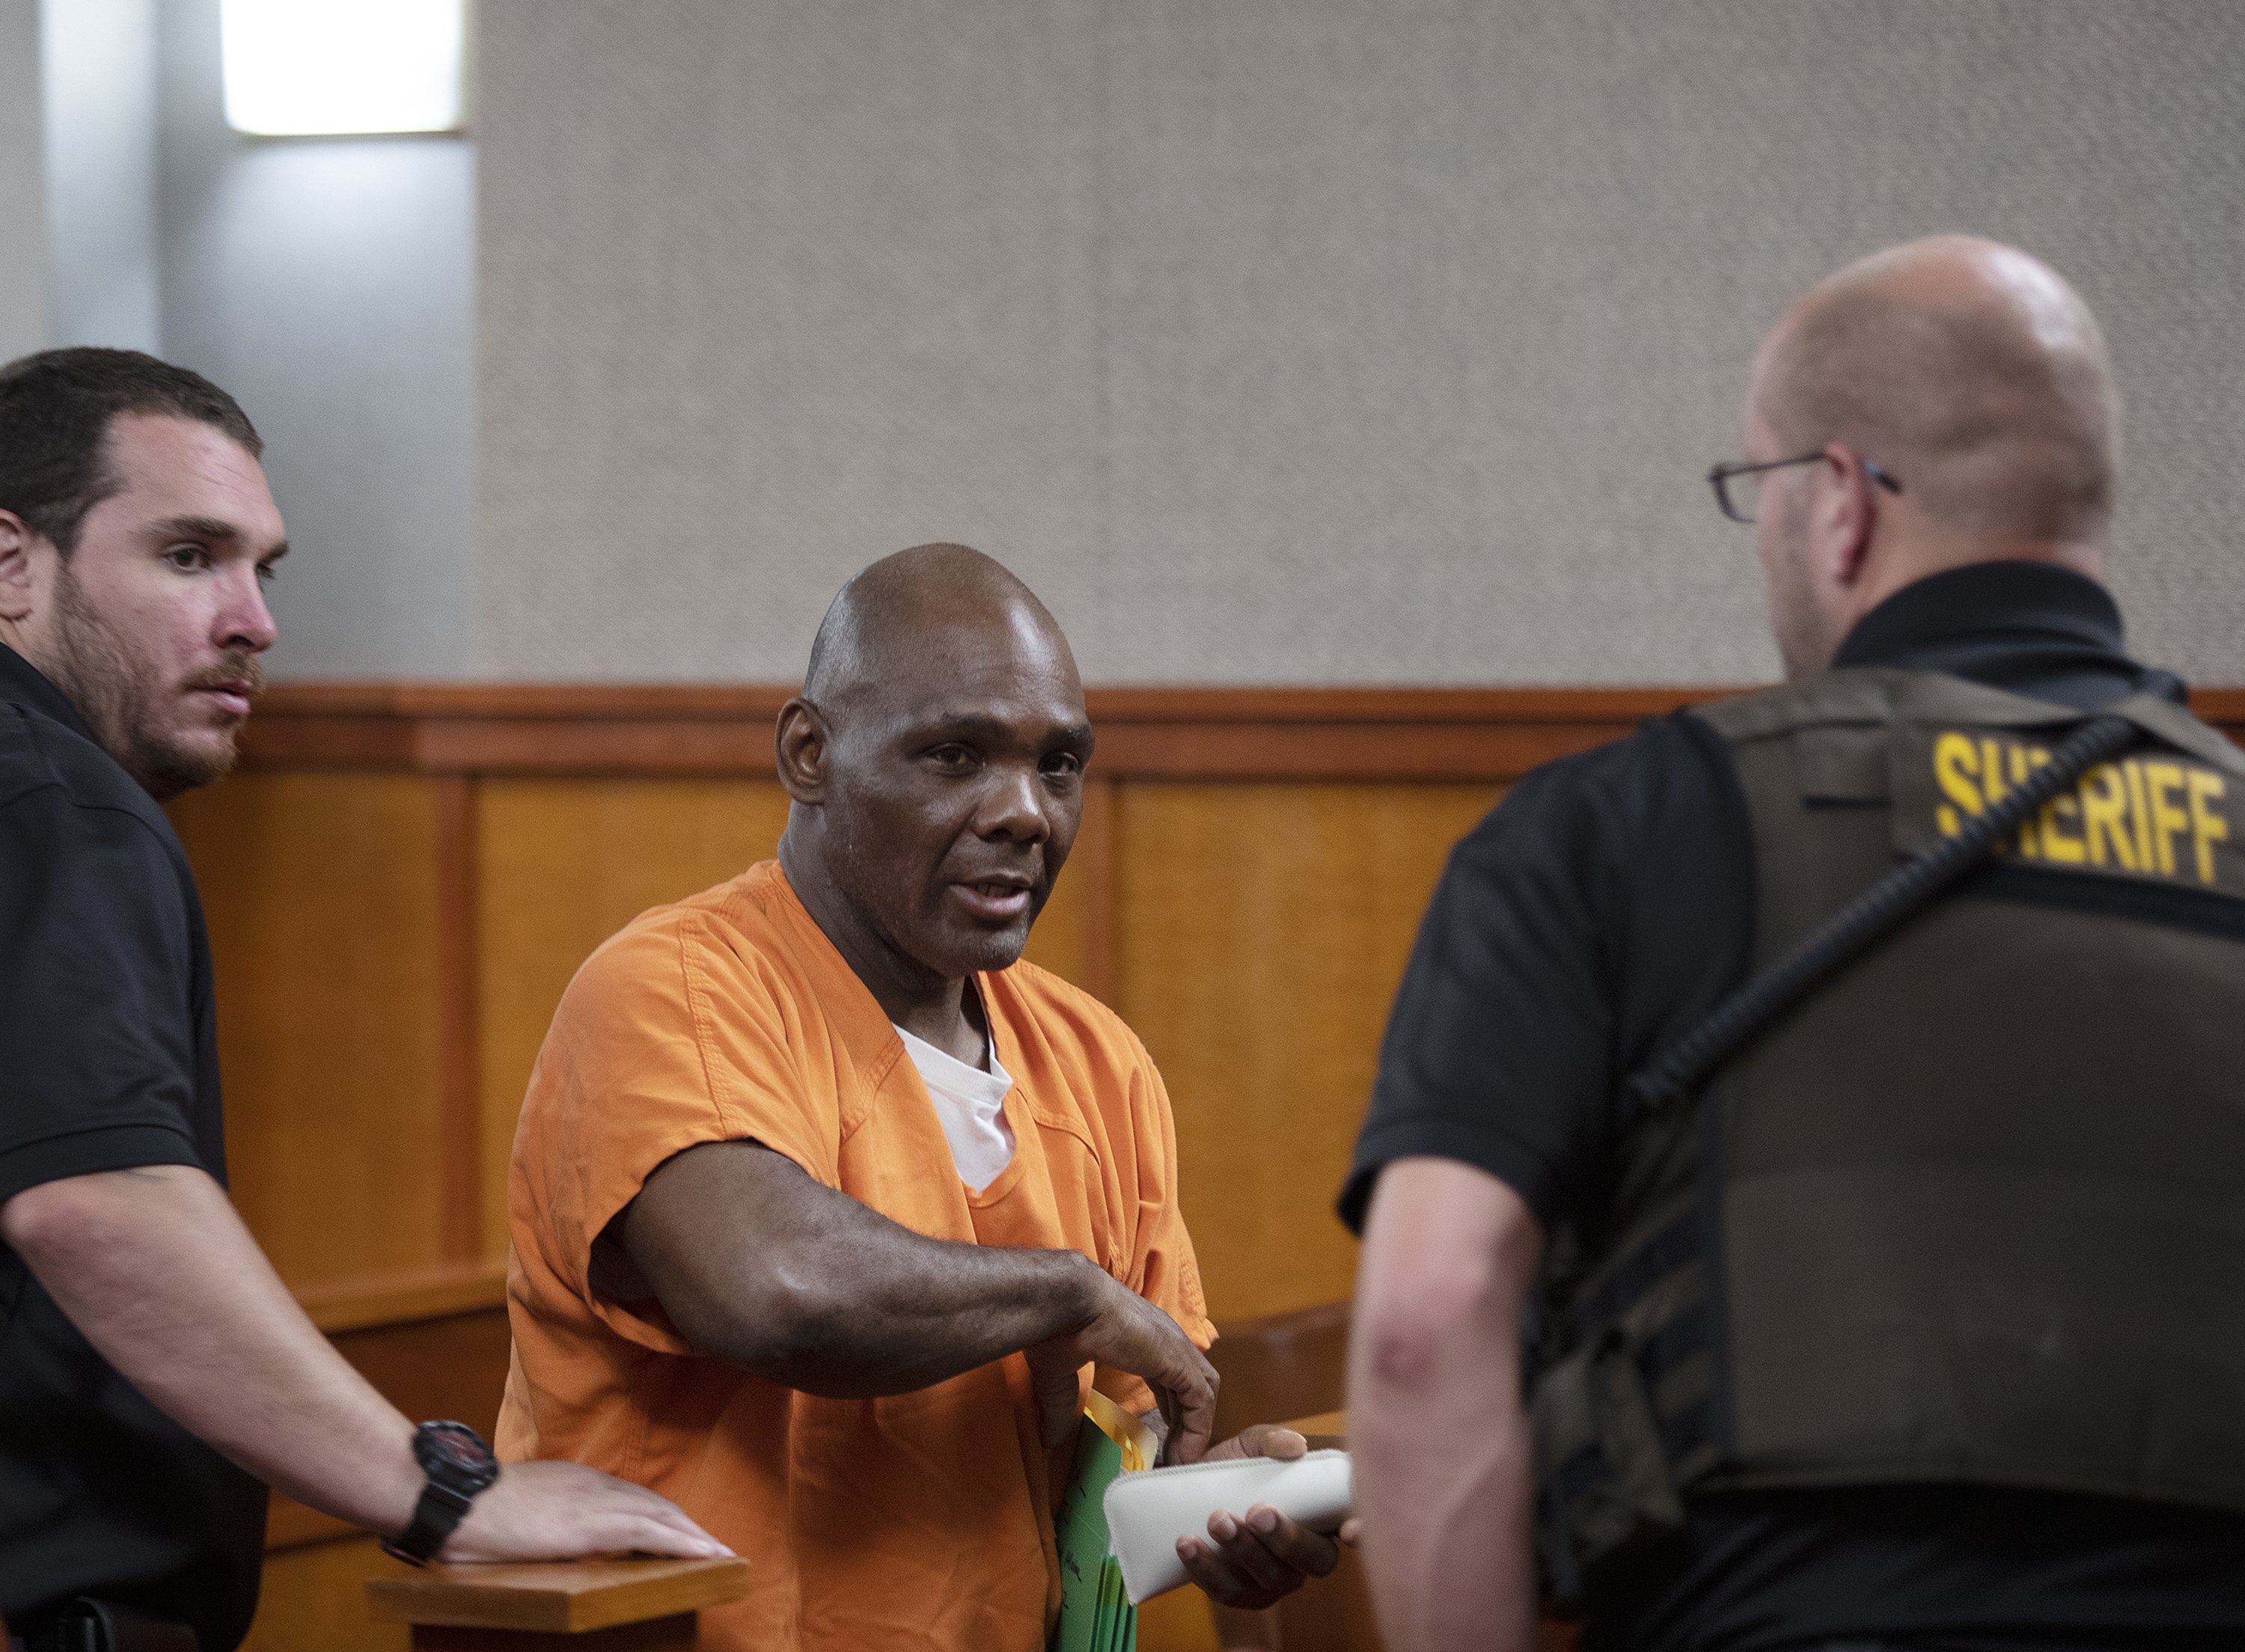 Man convicted of 1994 murder argues DNA analysis casts doubt on guilt pic